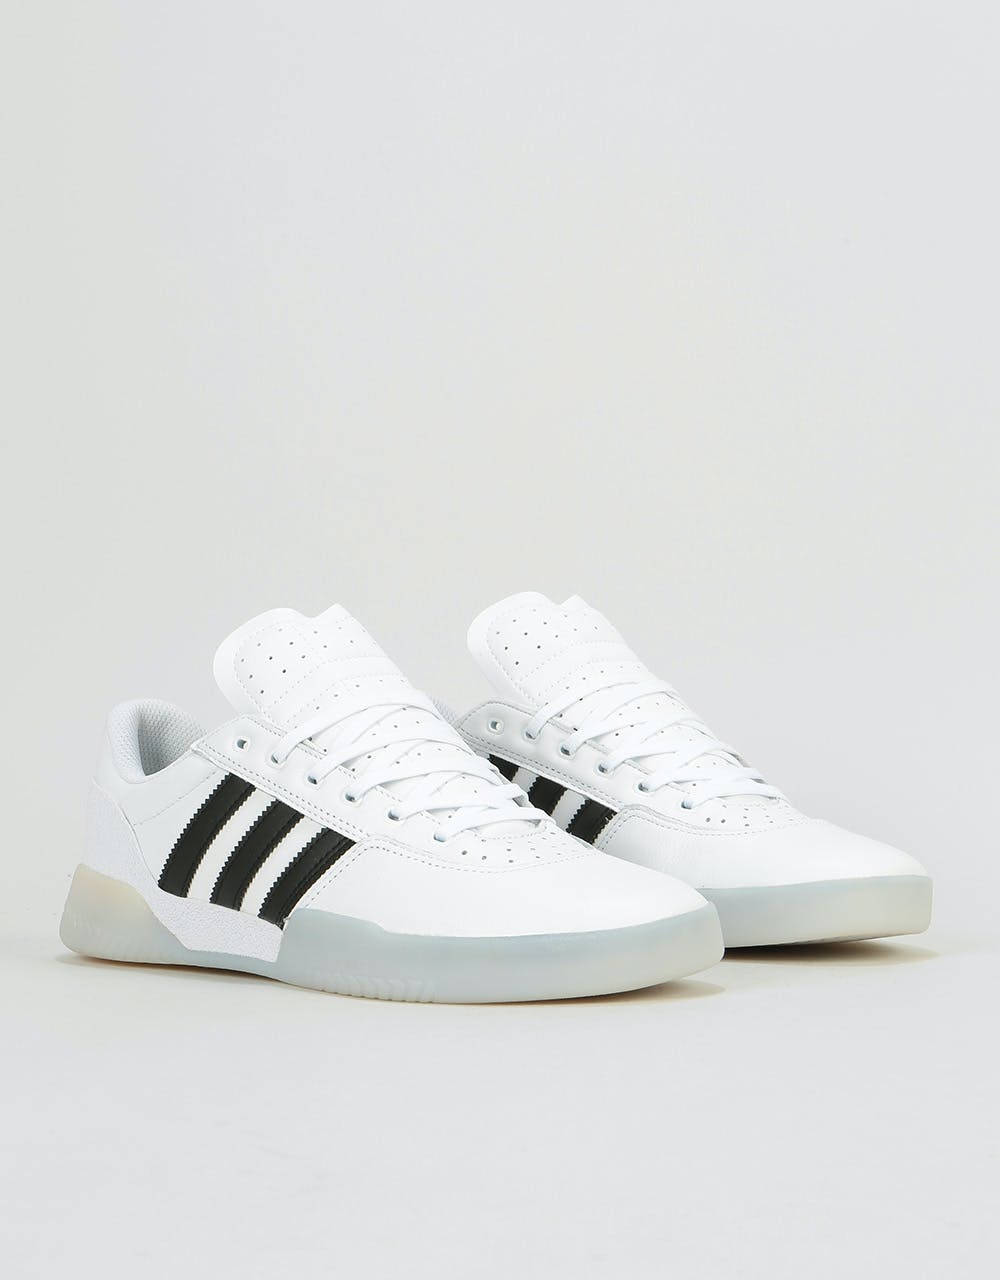 Adidas City Cup Skate Shoes - White/Core Black/Solid Grey